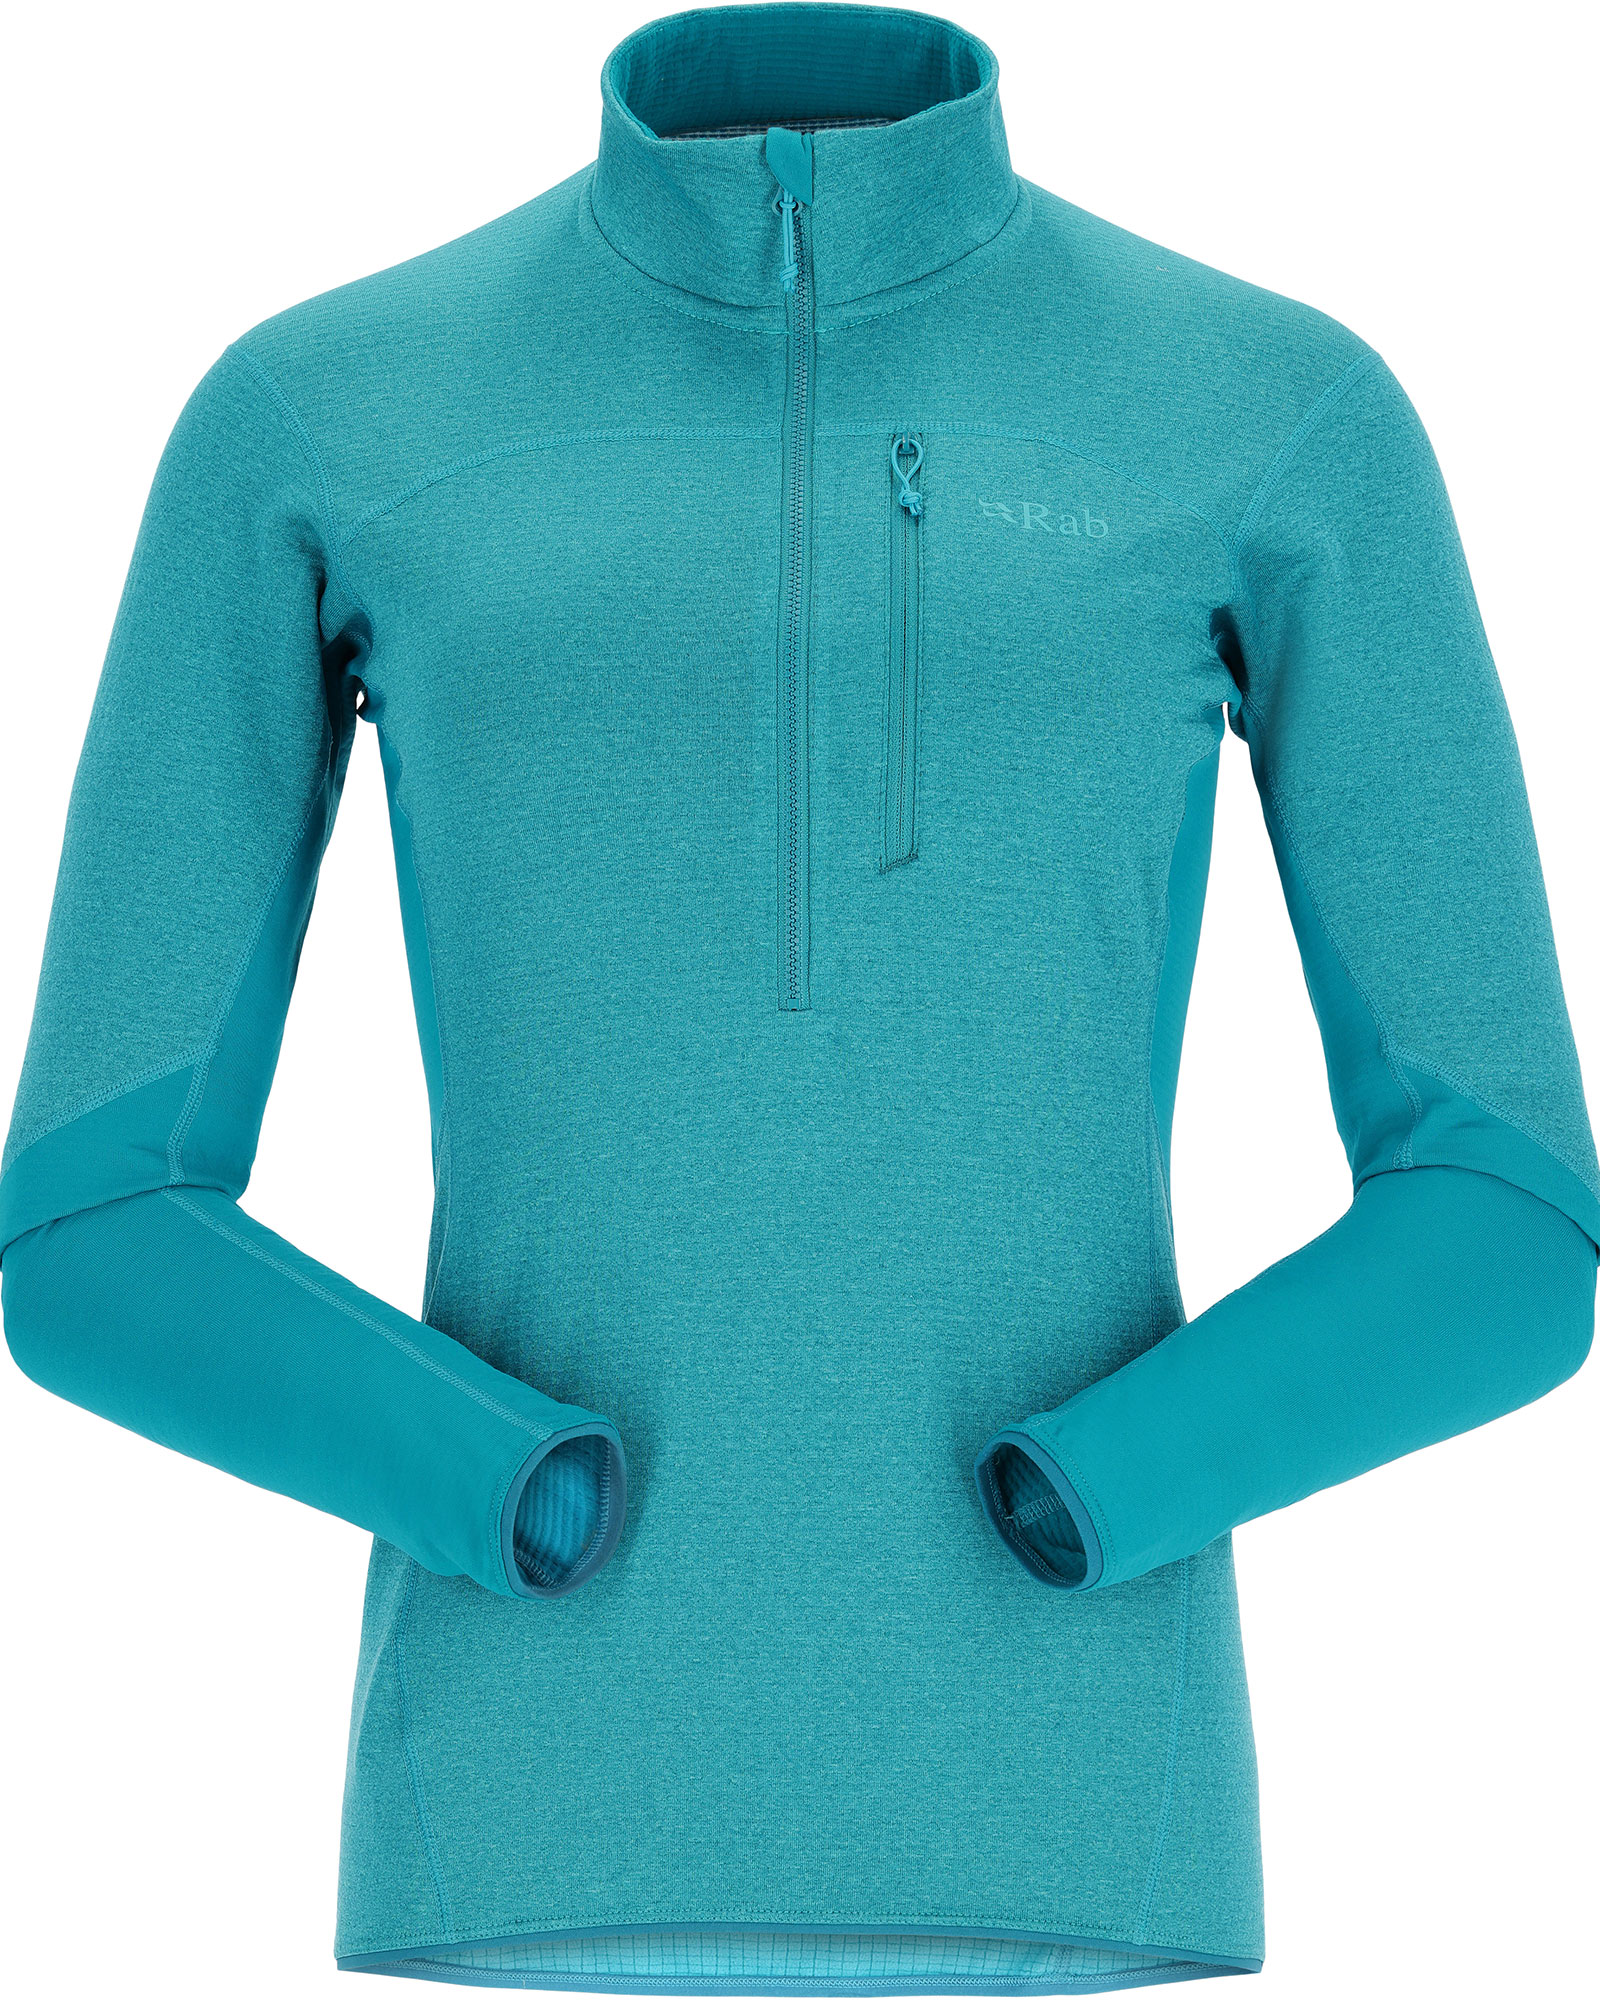 Product image of Rab Ascendor Women's Pull On